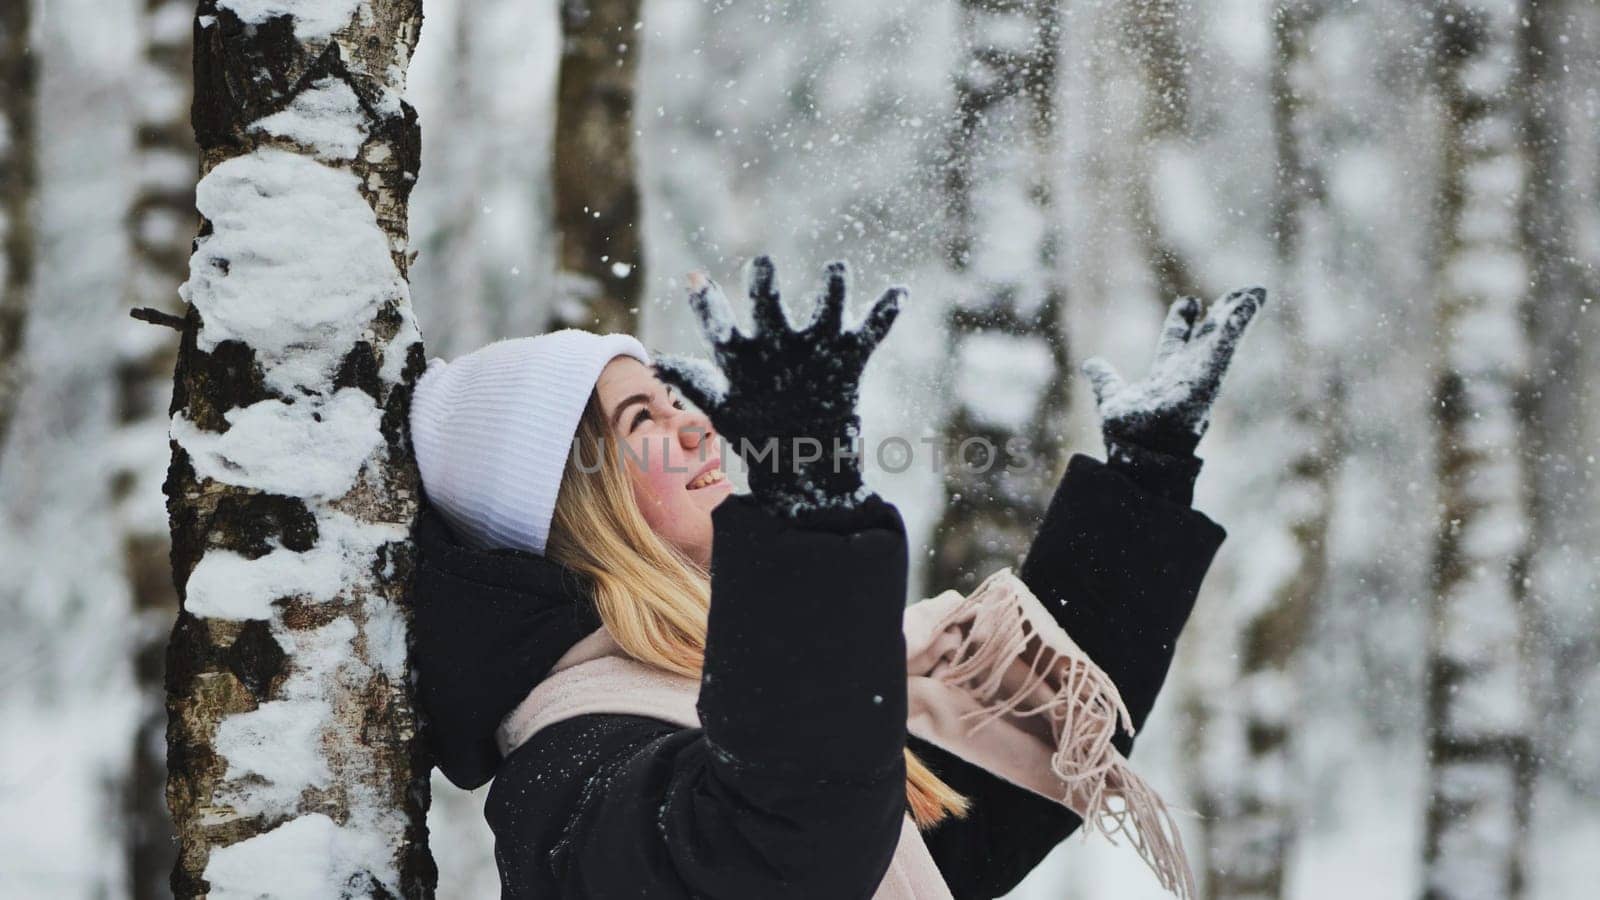 Teenage girl playing with snow. by DovidPro